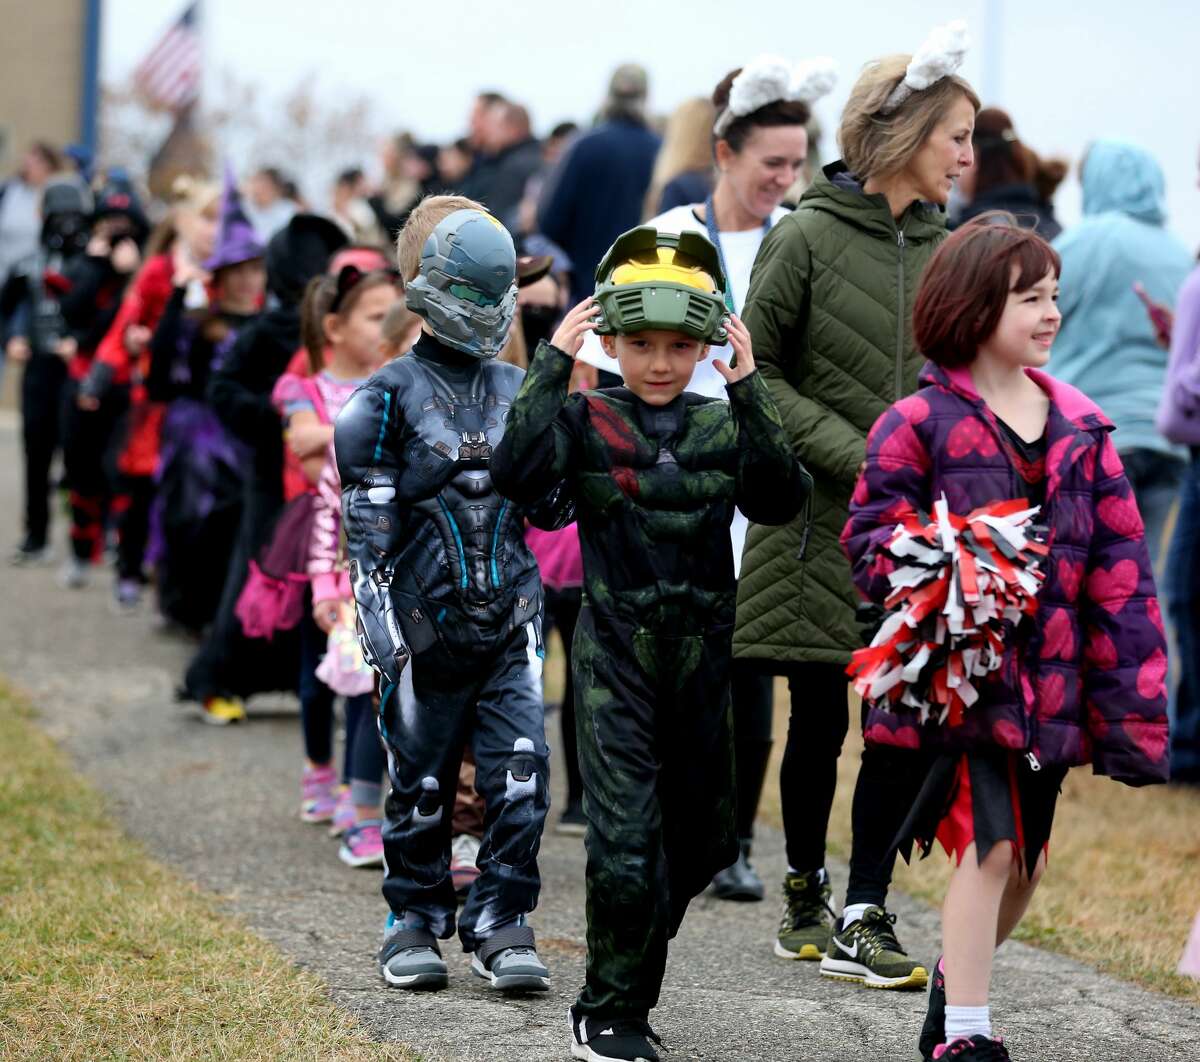 Elkton will be holding its regular trick or treating alongside its trunk or treat on Saturday, Oct. 29. Bad Axe's safe trick or treat in the park will also be held Saturday, with the rest of the area holding normal trick-or-treat hours on Halloween, which falls on a Monday this year.